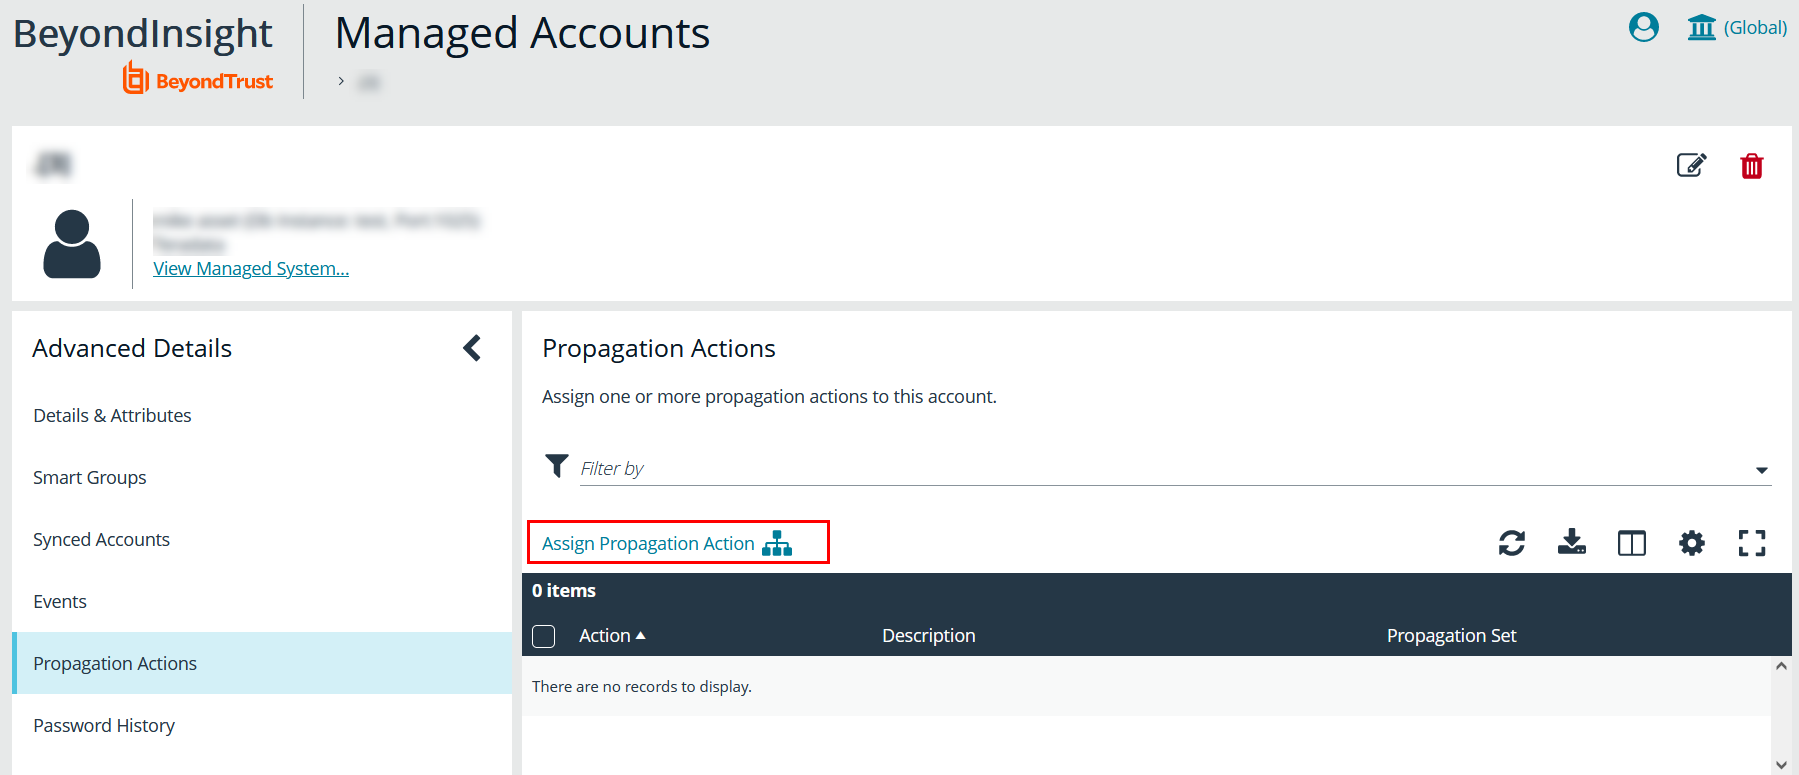 Screenshot of Propagation Actions in the Advananced Details of a Managed Account